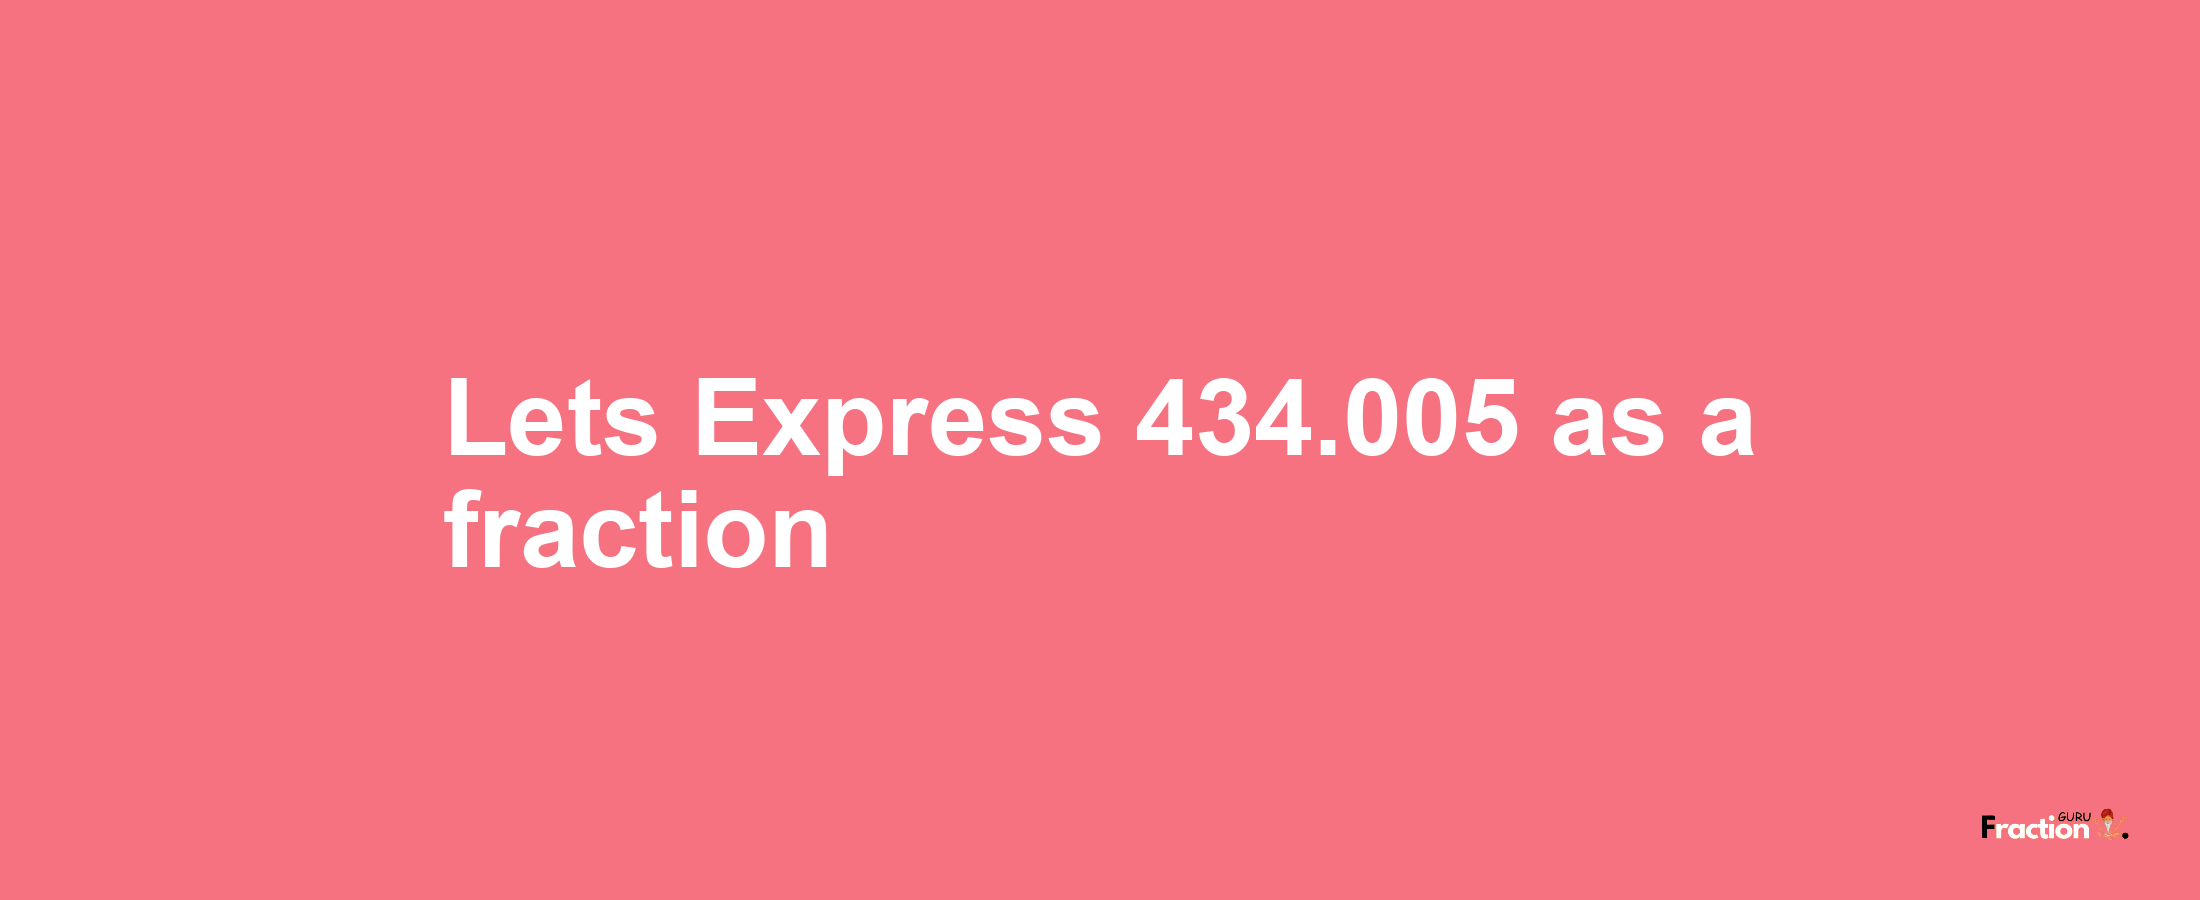 Lets Express 434.005 as afraction